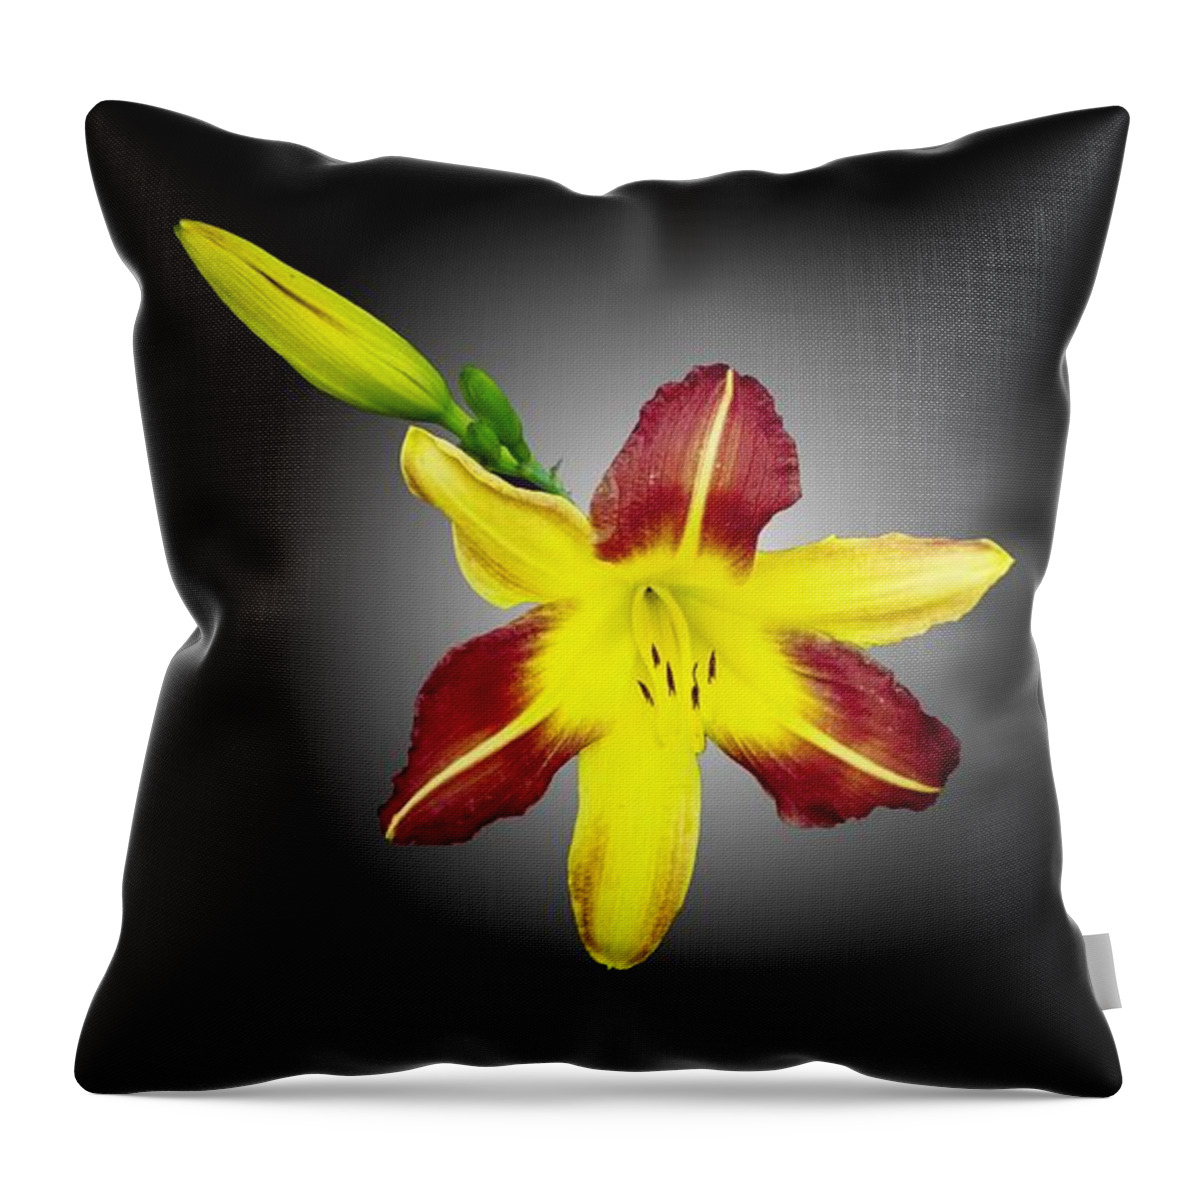 Lily And Bud Throw Pillow featuring the photograph Lily and Bud by Mike Breau